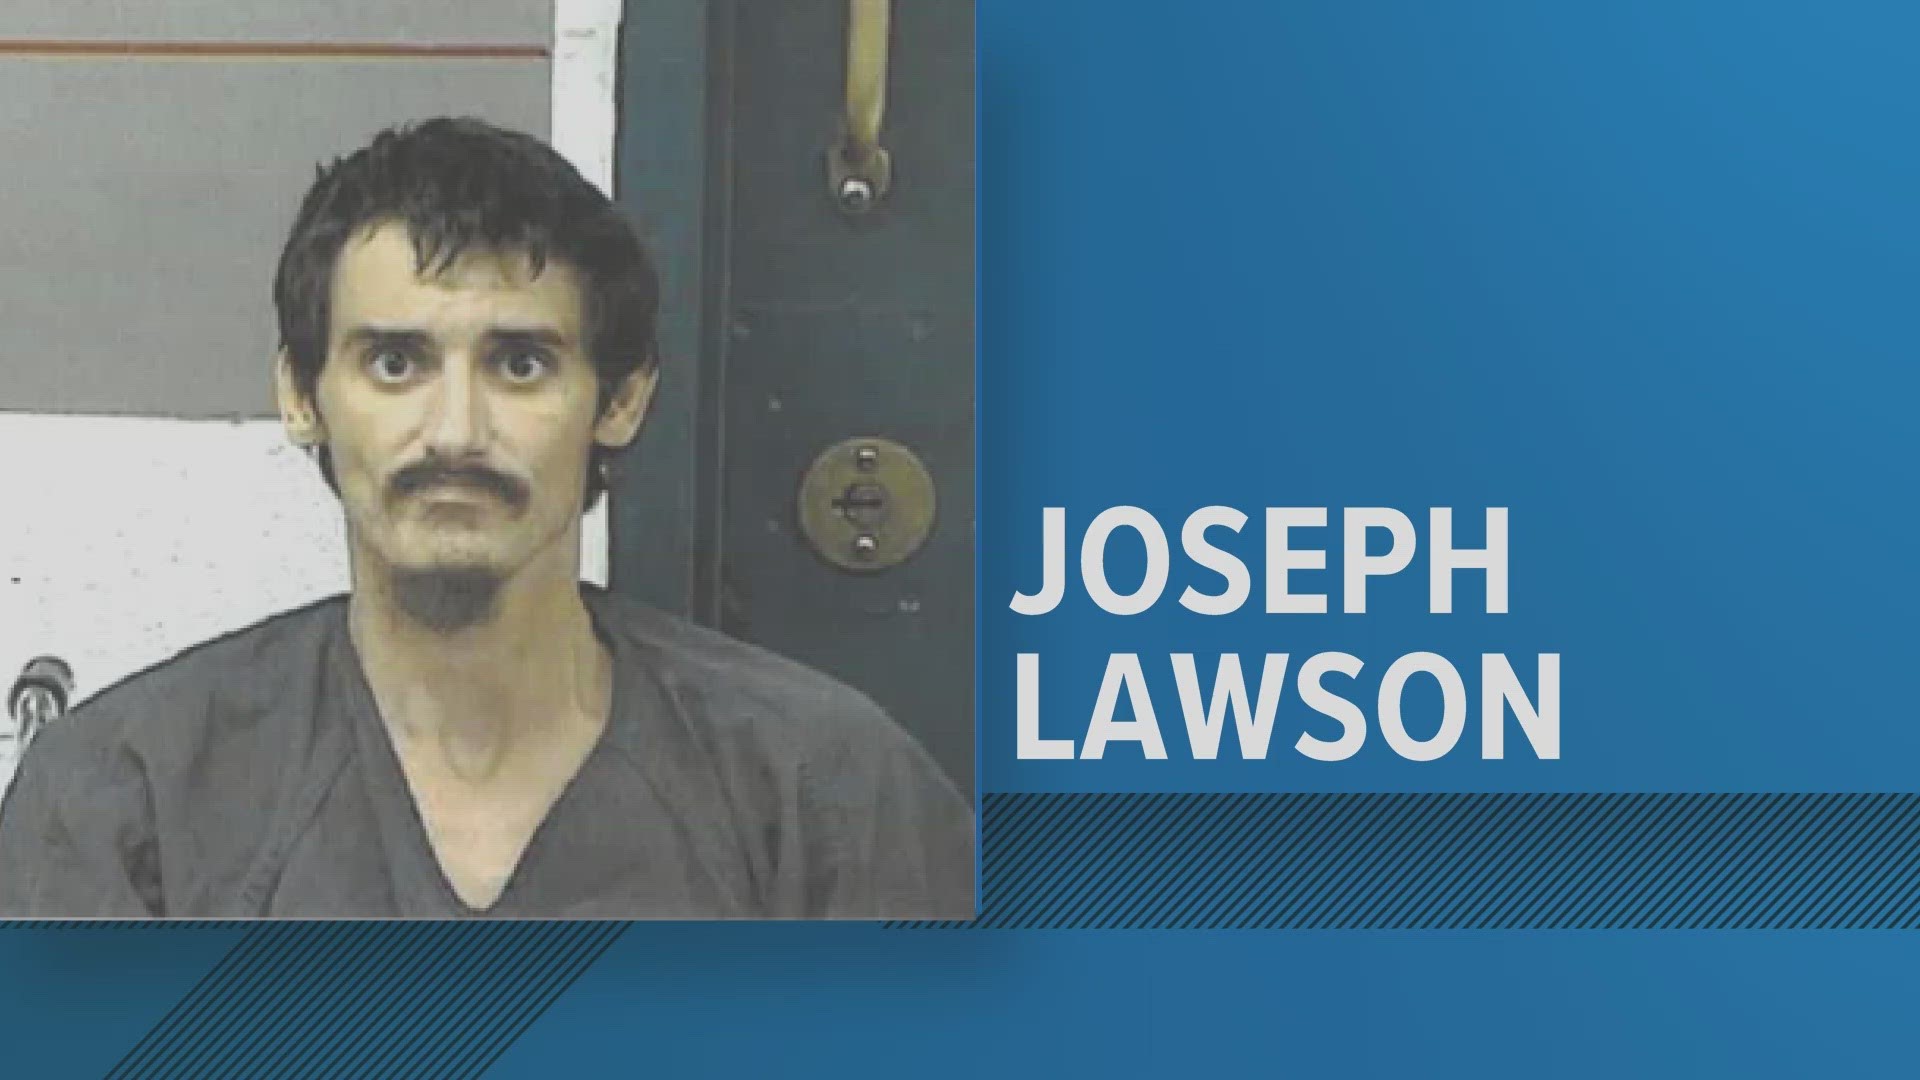 Joseph Lawson’s first pre-trial hearing was scheduled for Thursday in Nelson County Circuit court.